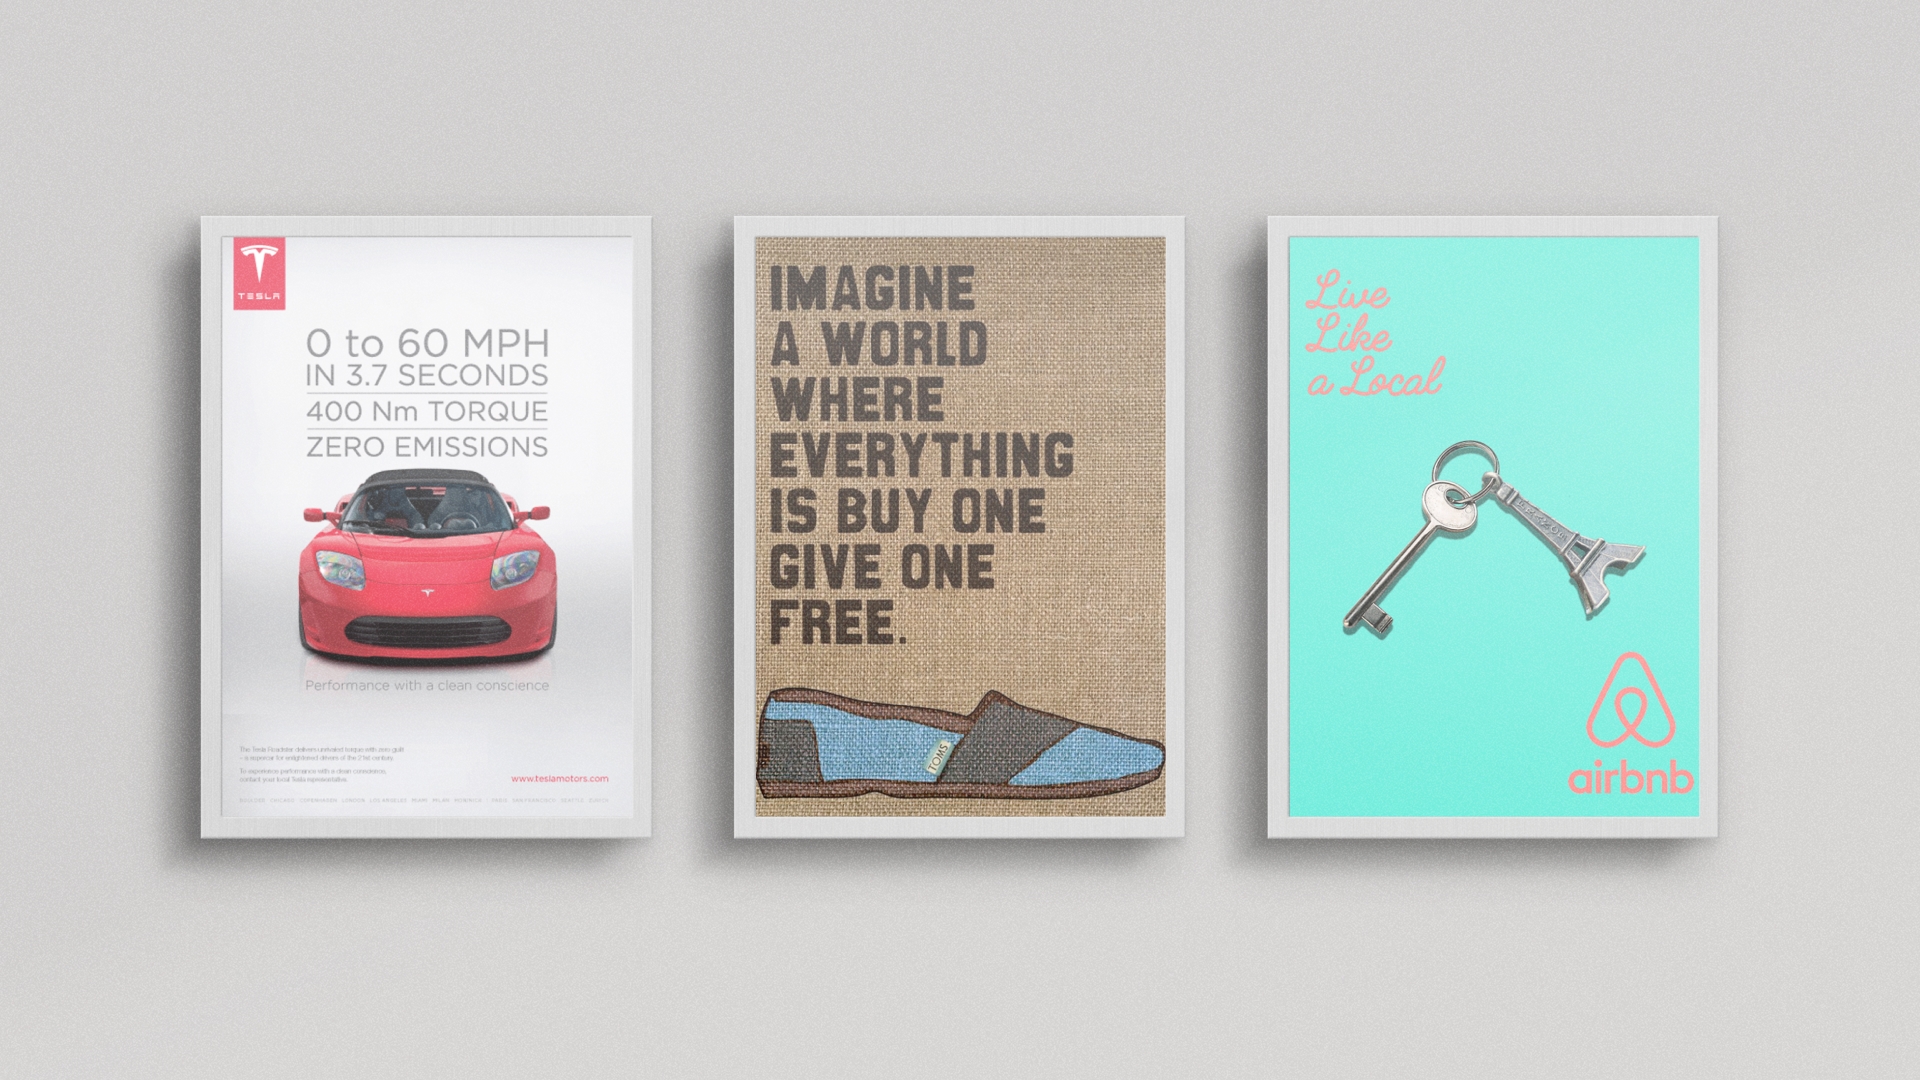 branding strategies by tesla, TOMS and airbnb